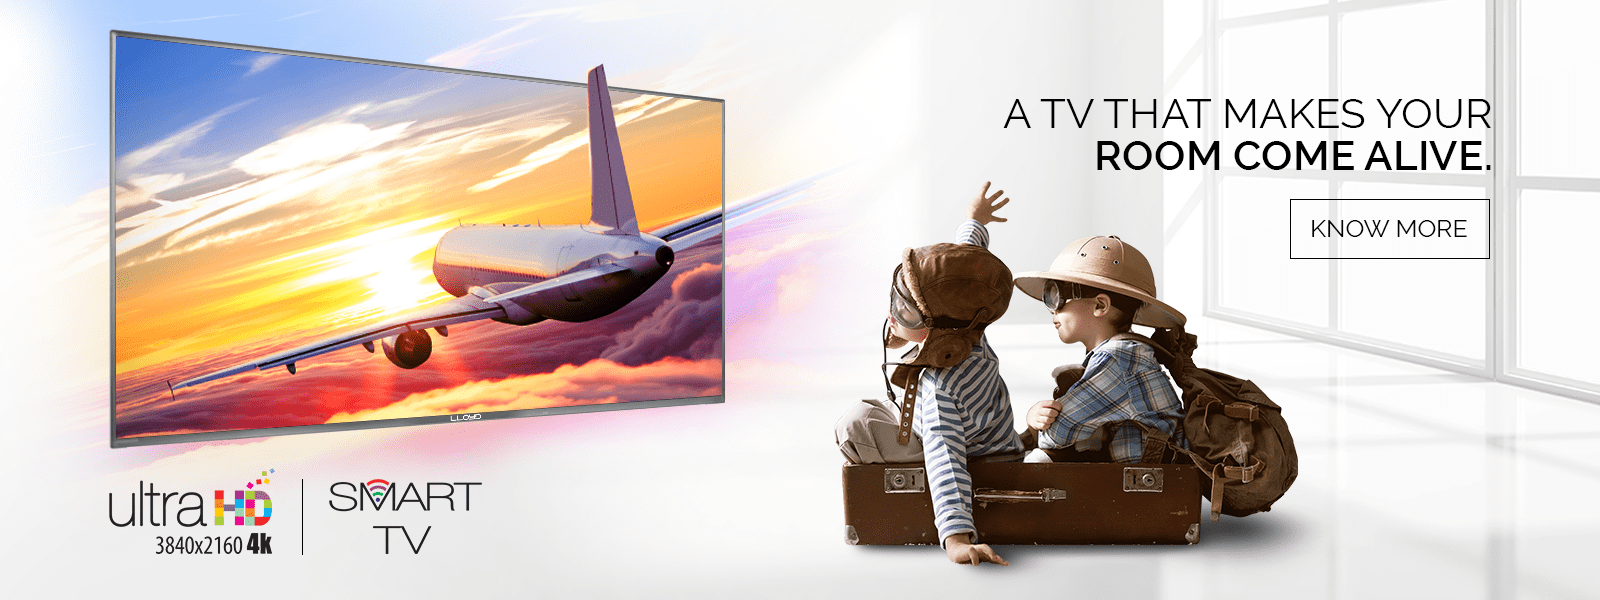 Buy Full HD LED TV from LLOYD - TV That Makes Your Room Come Alive